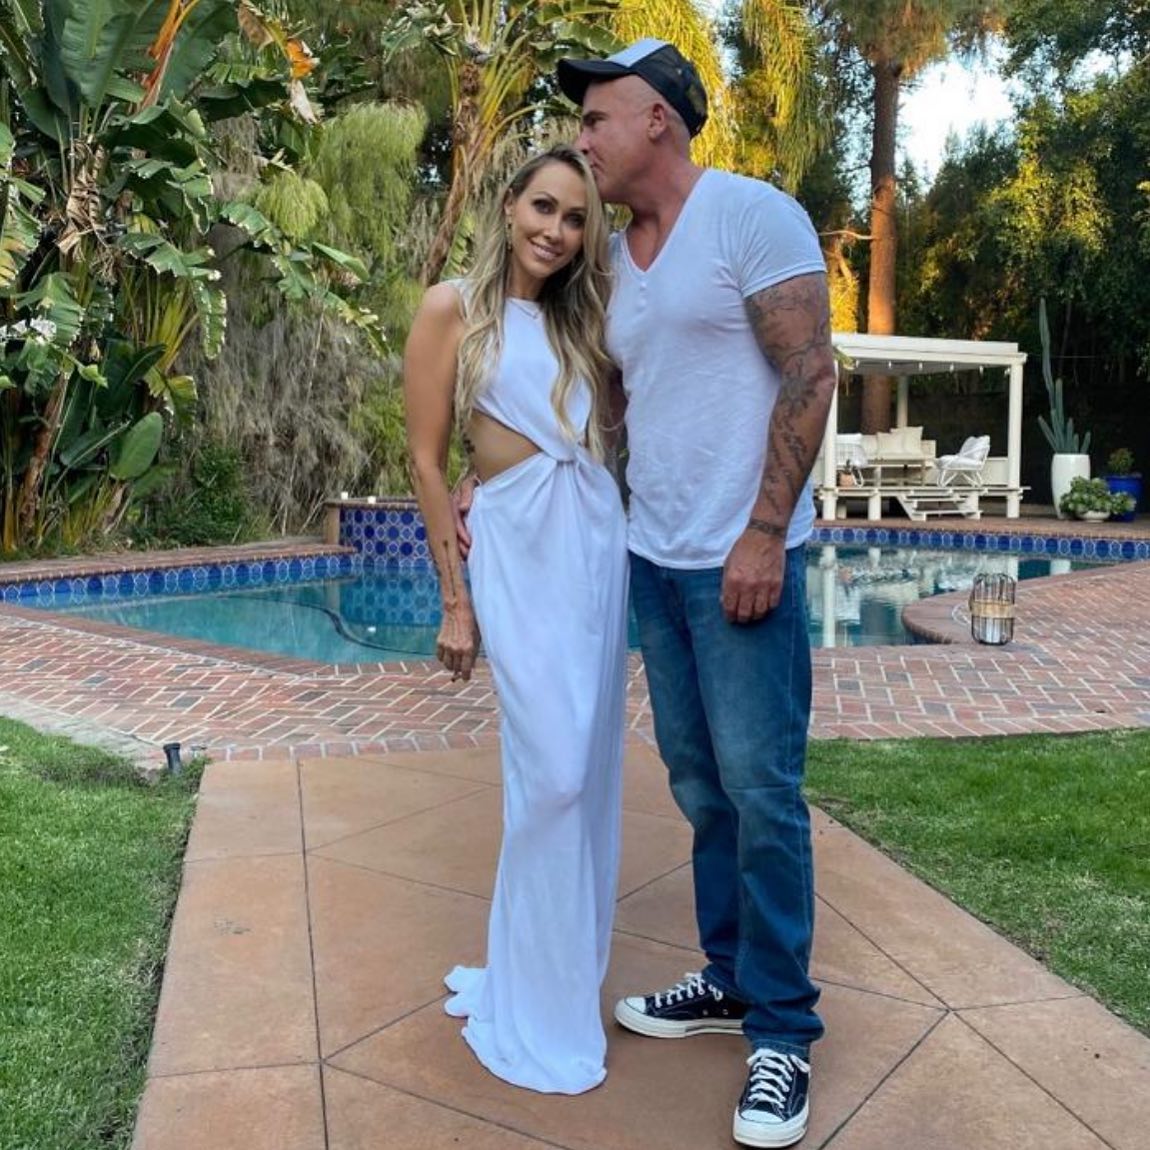 The snap came after news broke that her mother Tish supposedly stole her boyfriend, Dominic Purcell